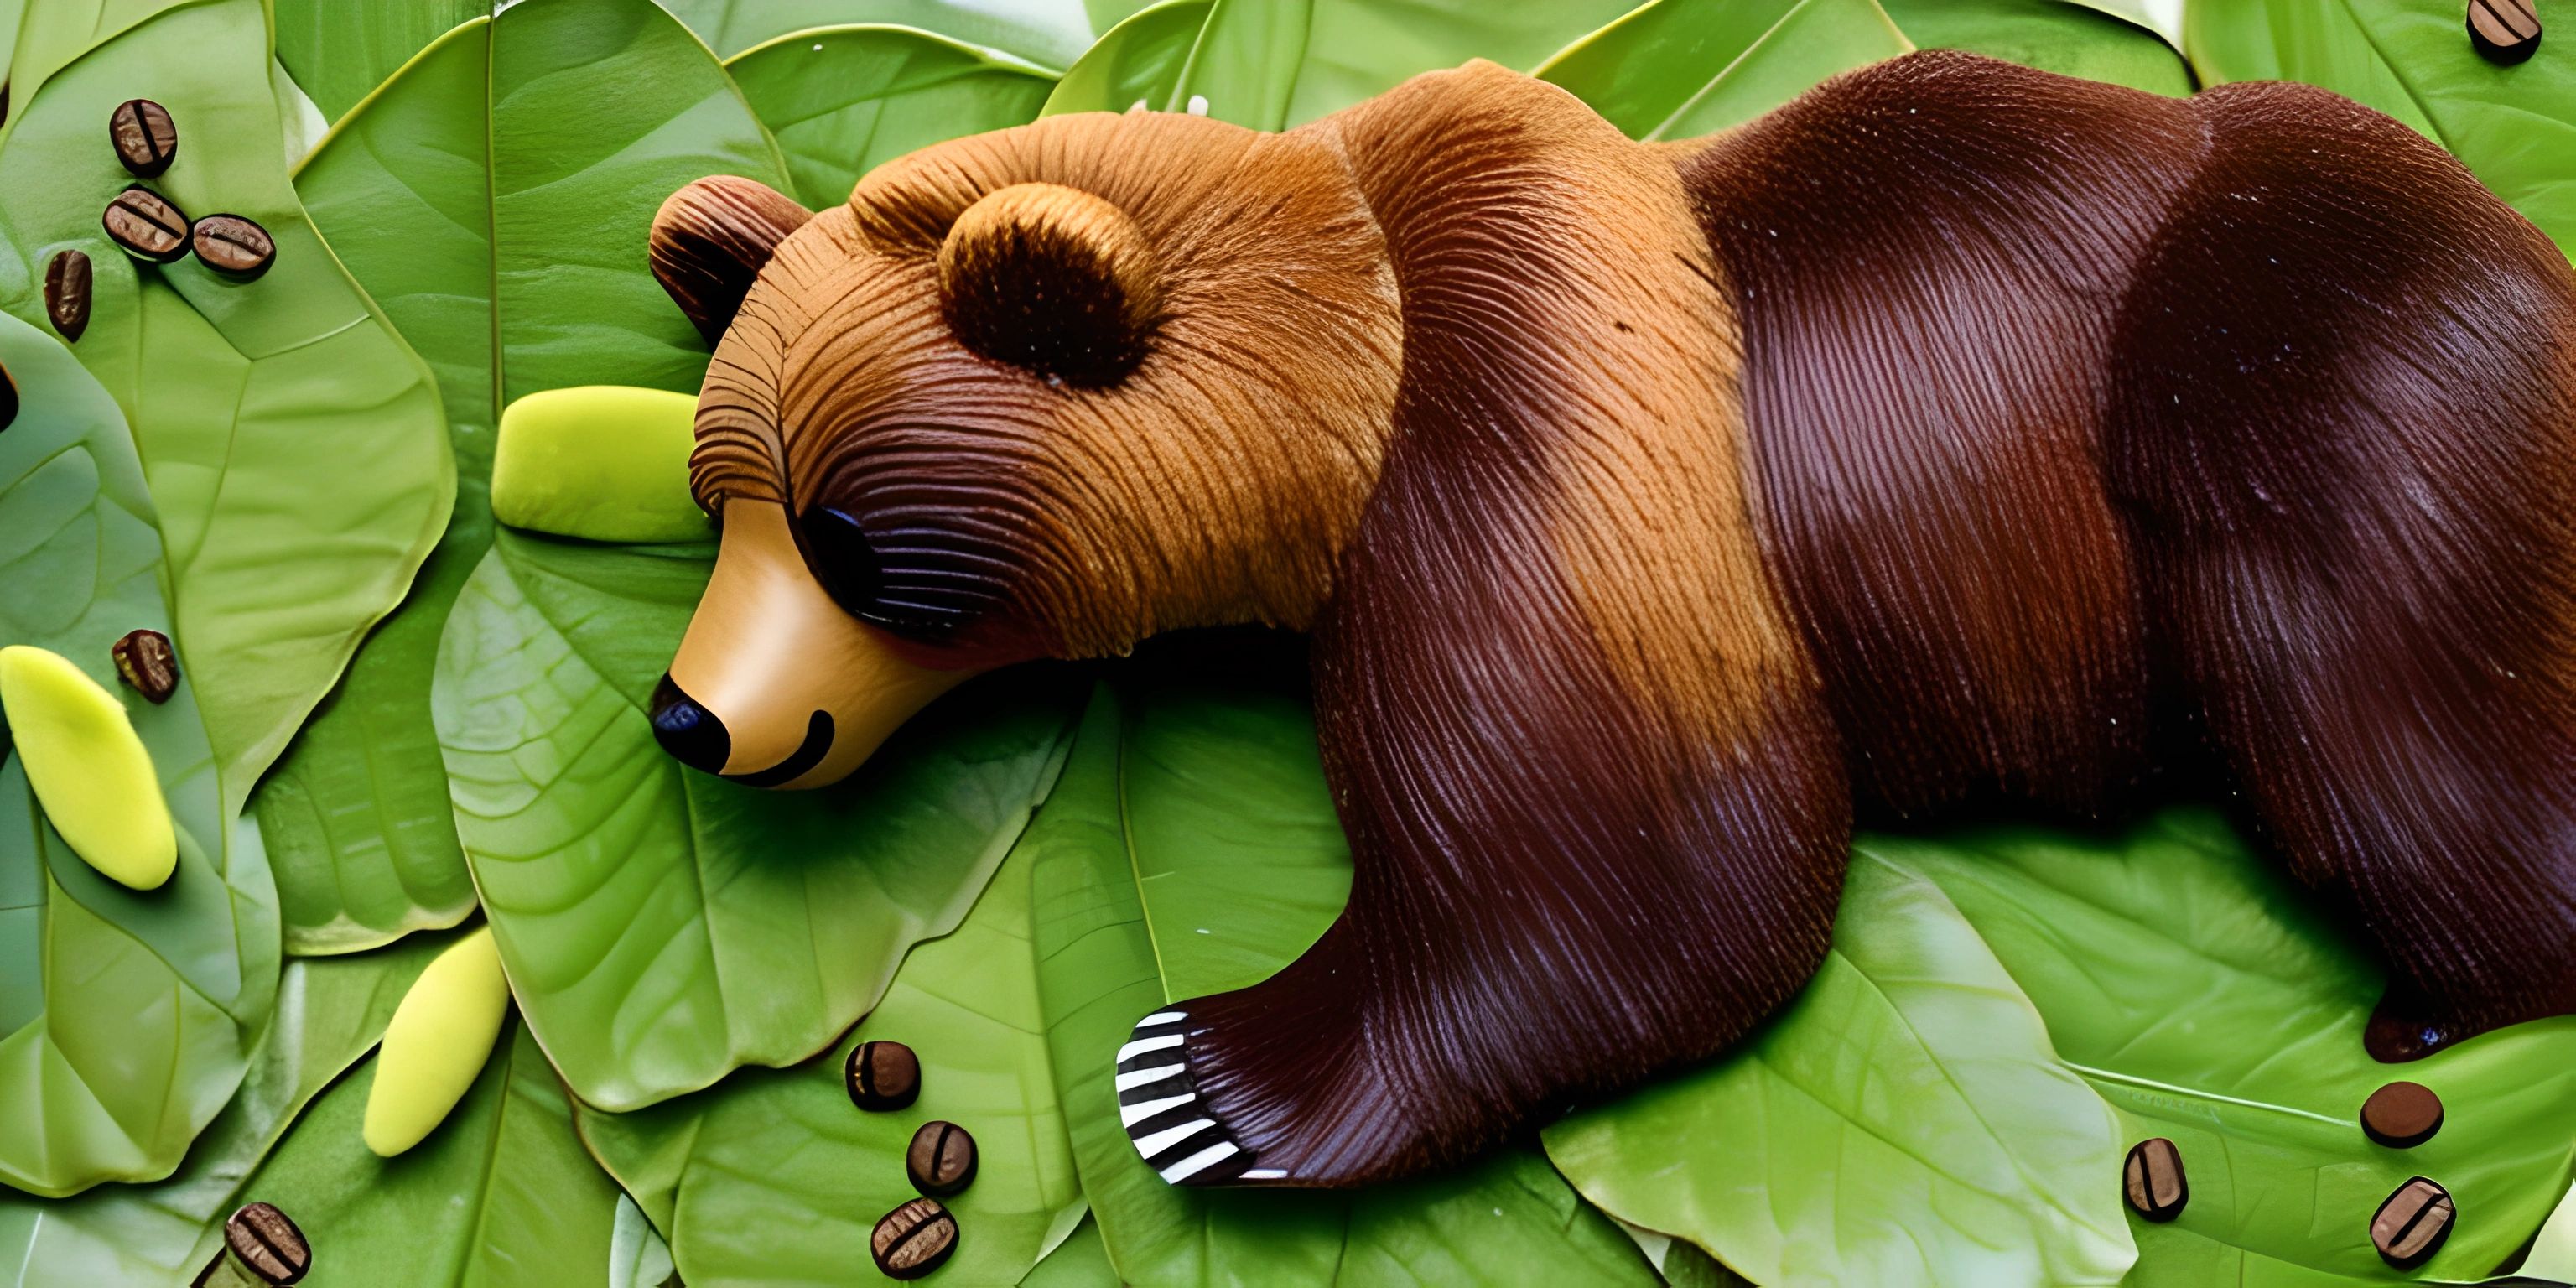 the bear is laying on a big leaf with coffee beans scattered around it and in the background